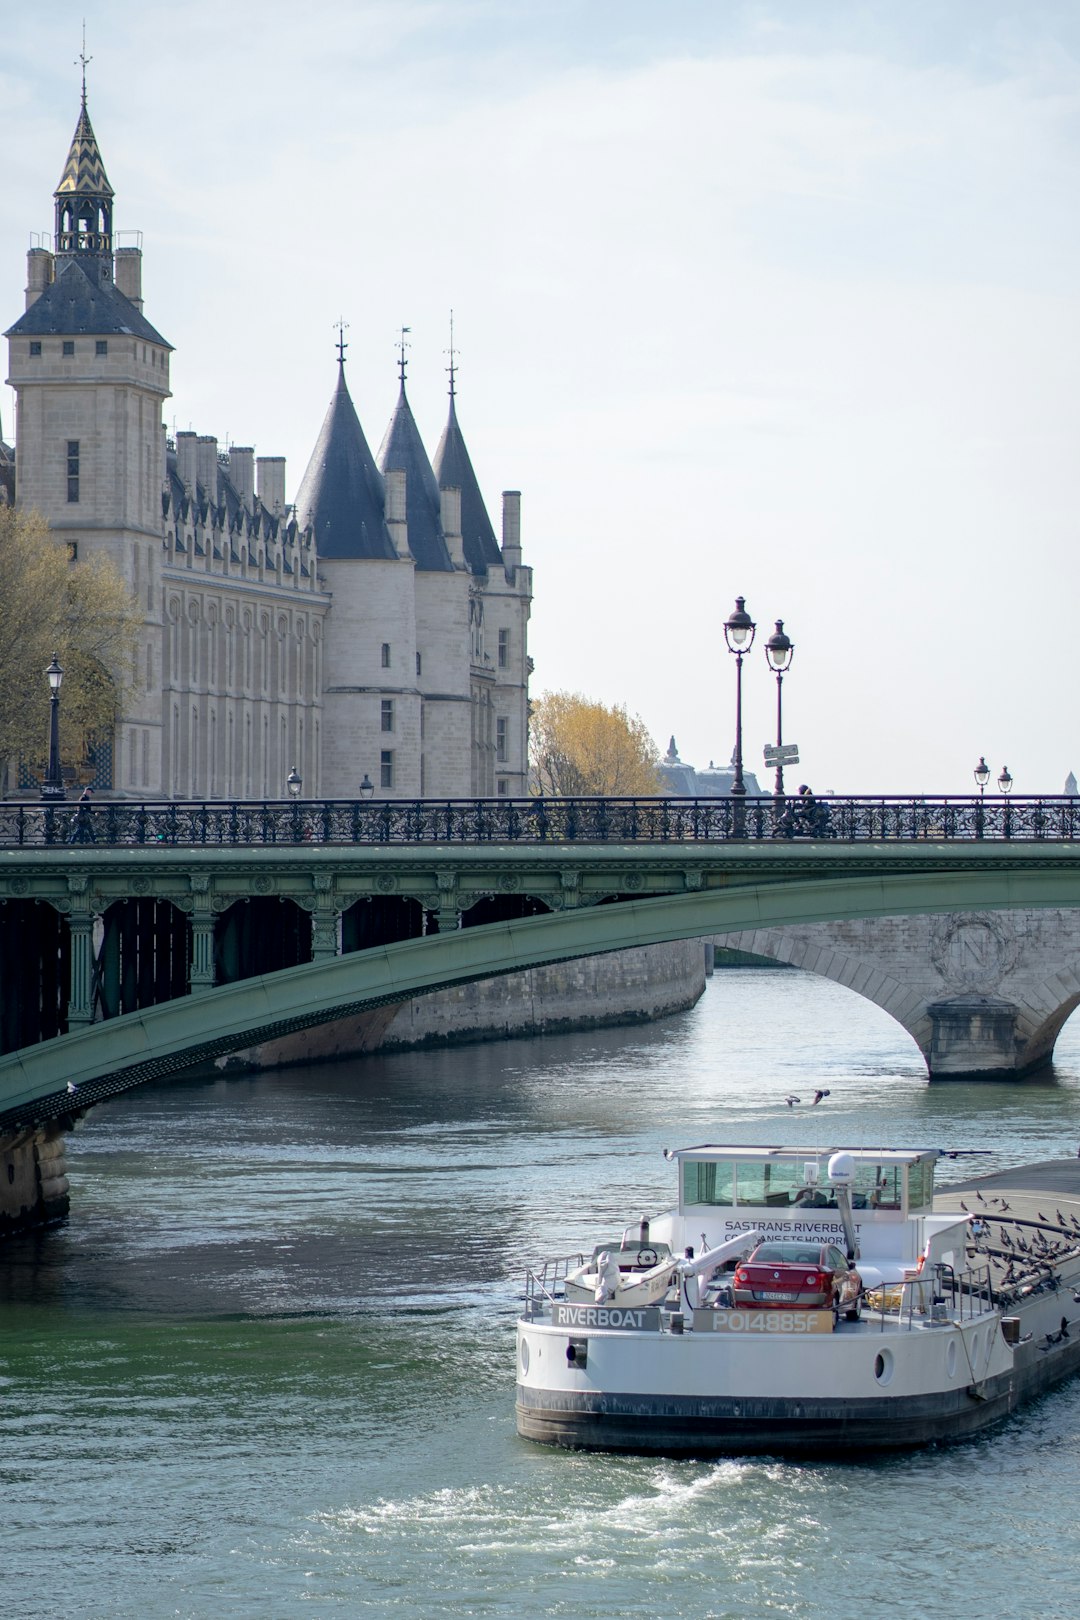 Travel Tips and Stories of Conciergerie in France